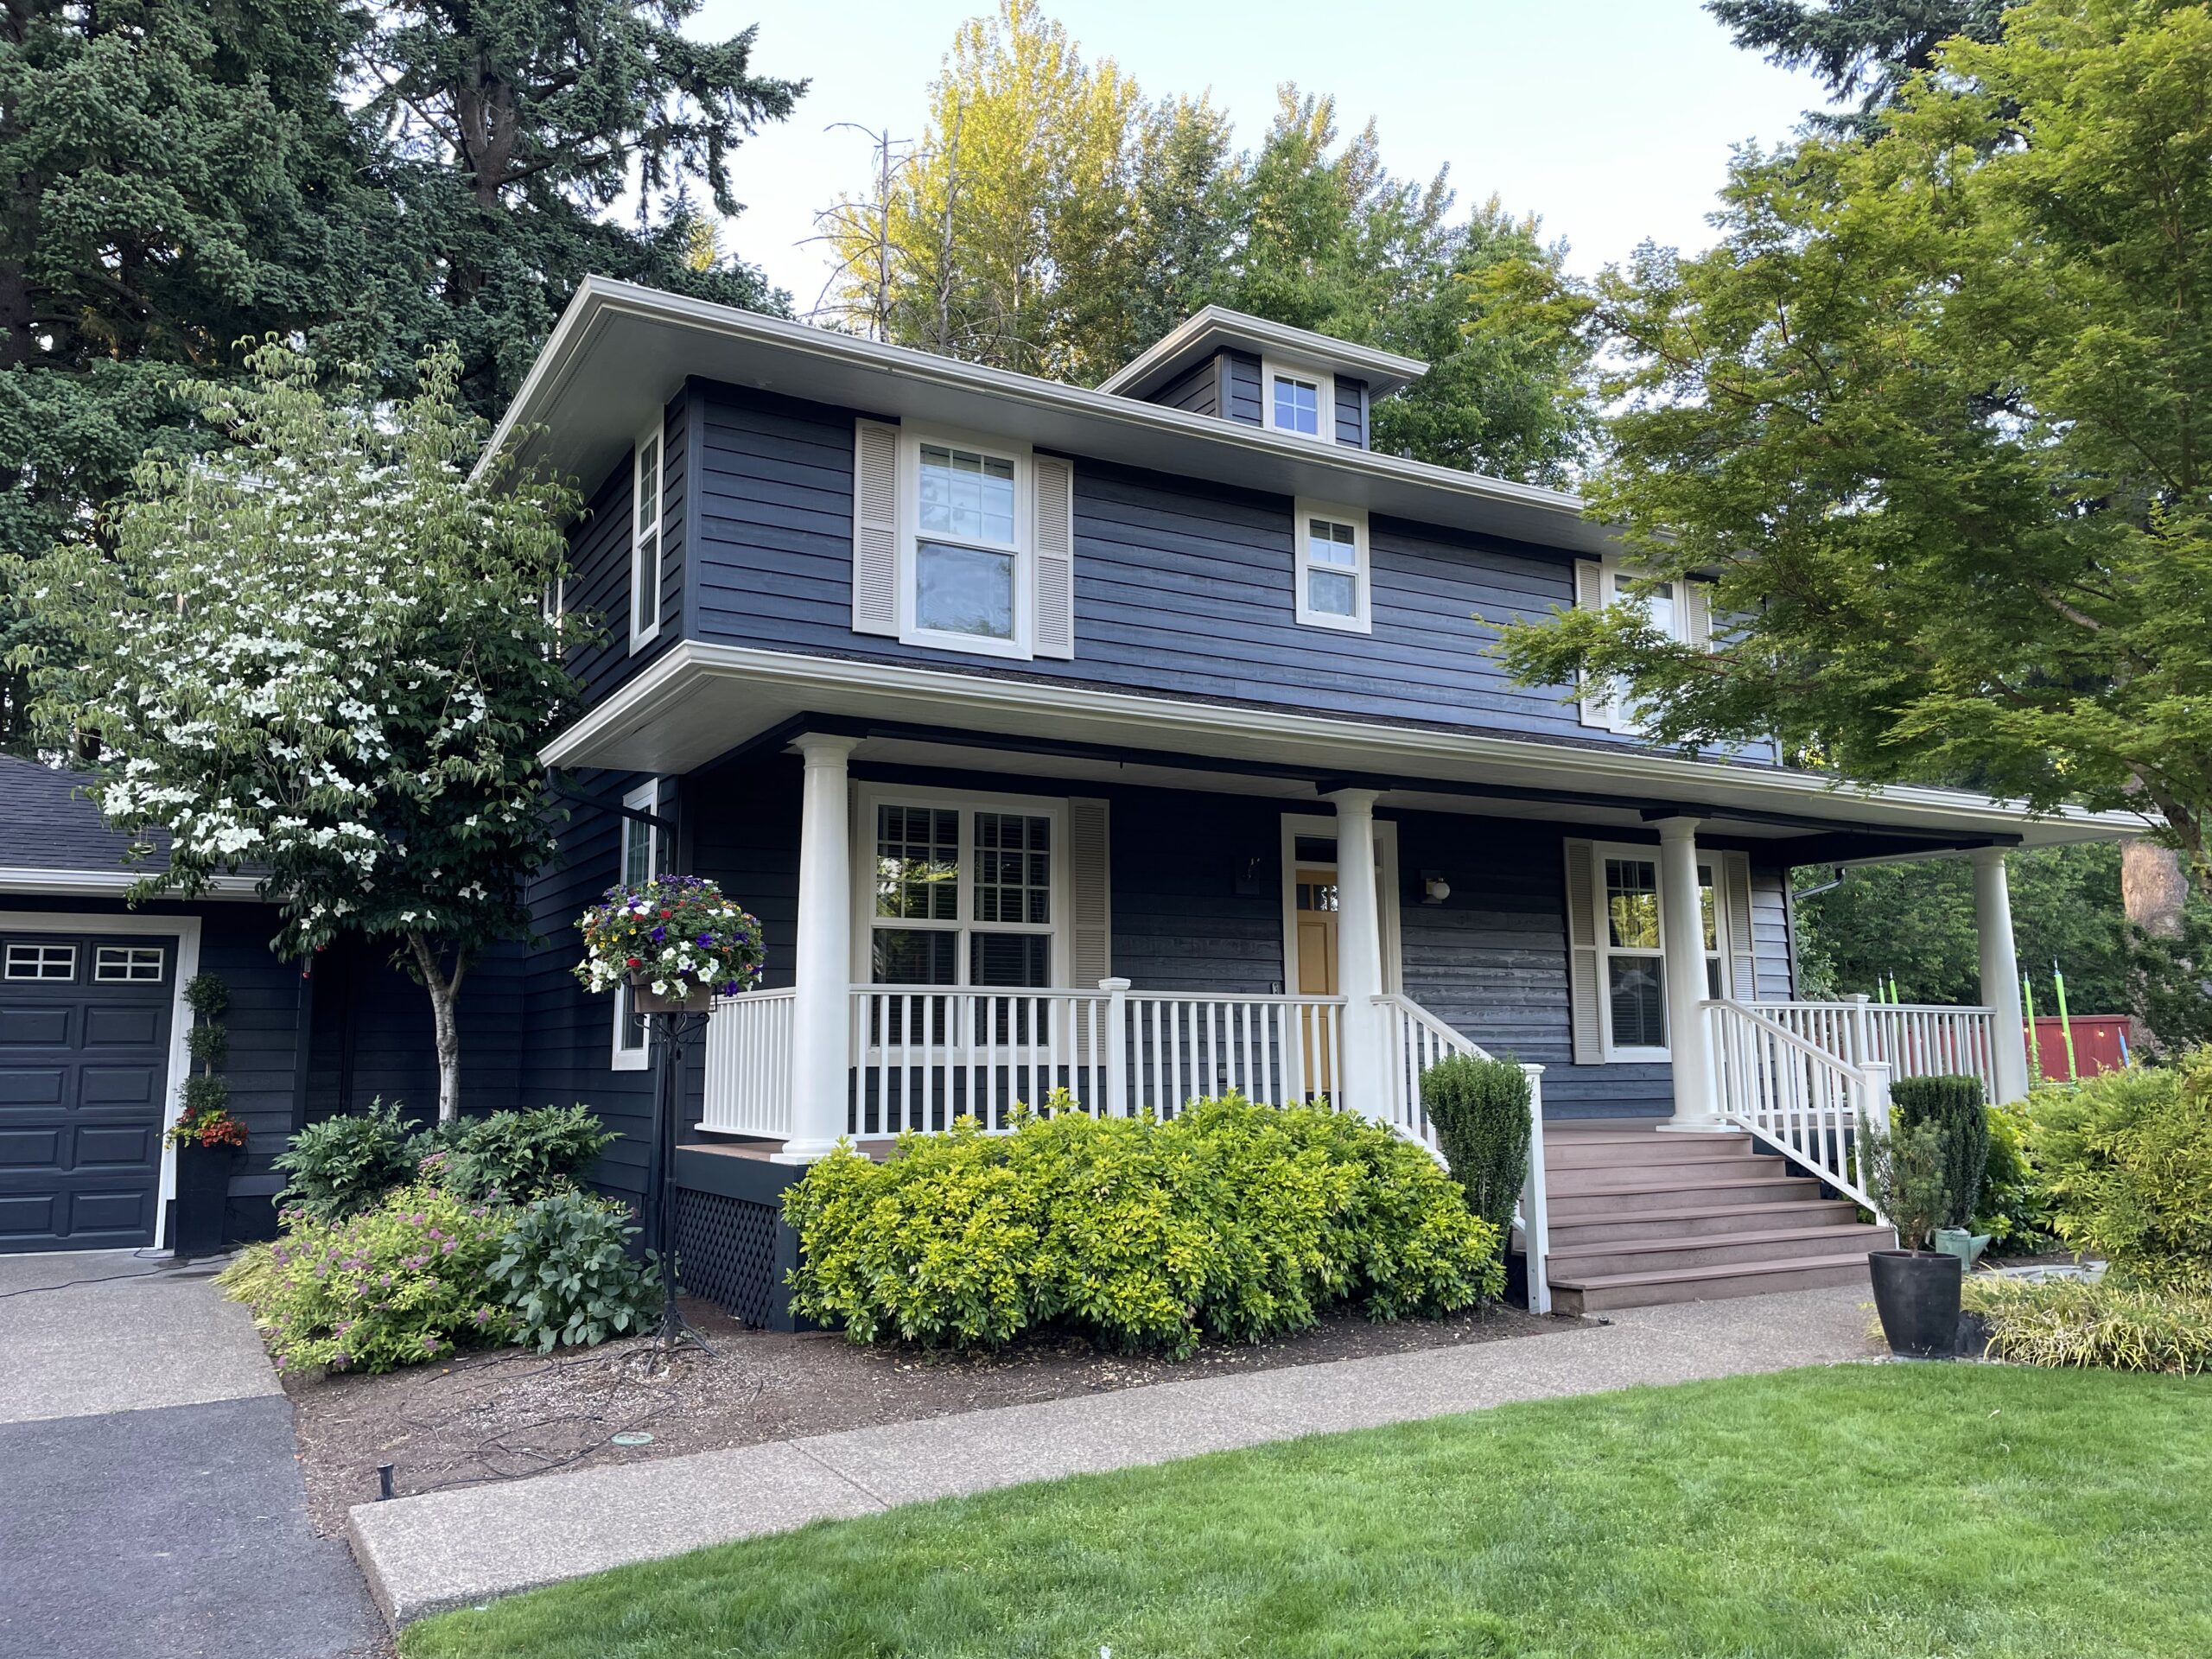 Photo of Exterior Paint Job After 20 Years Makes a Magical Impression in This West Linn Neighborhood! in Portland, Oregon